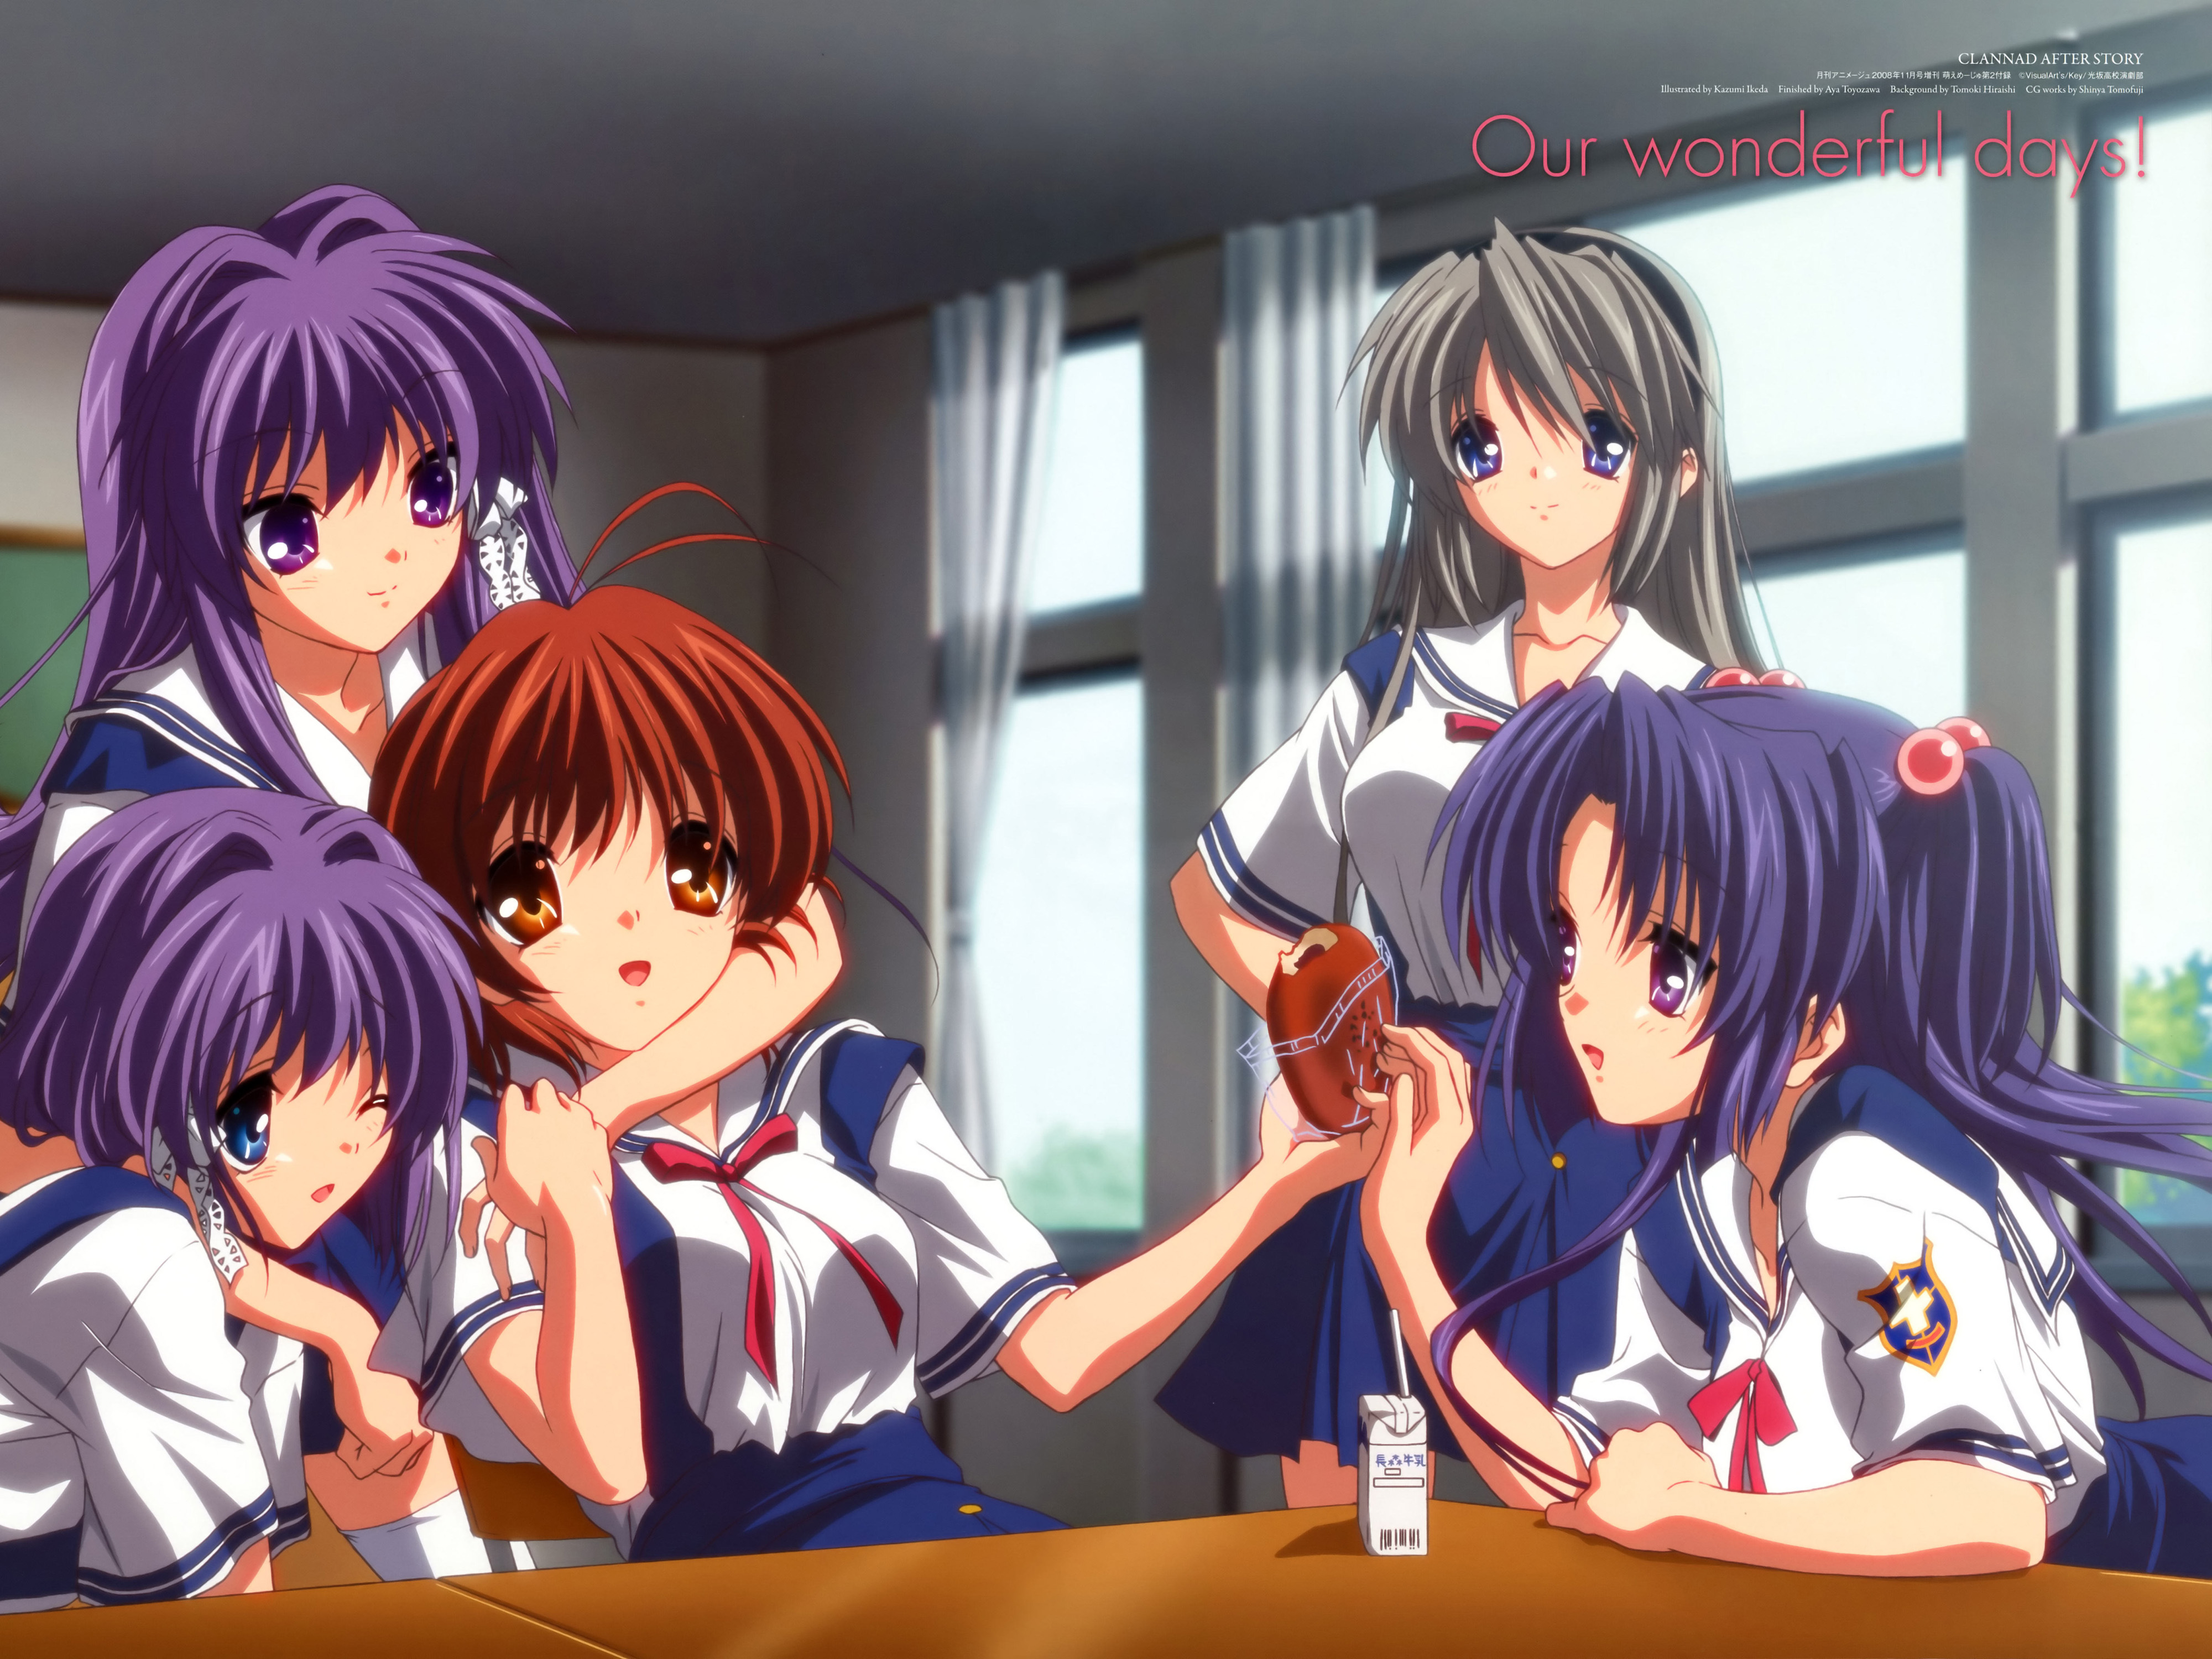 Clannad: After Story - Statistics 